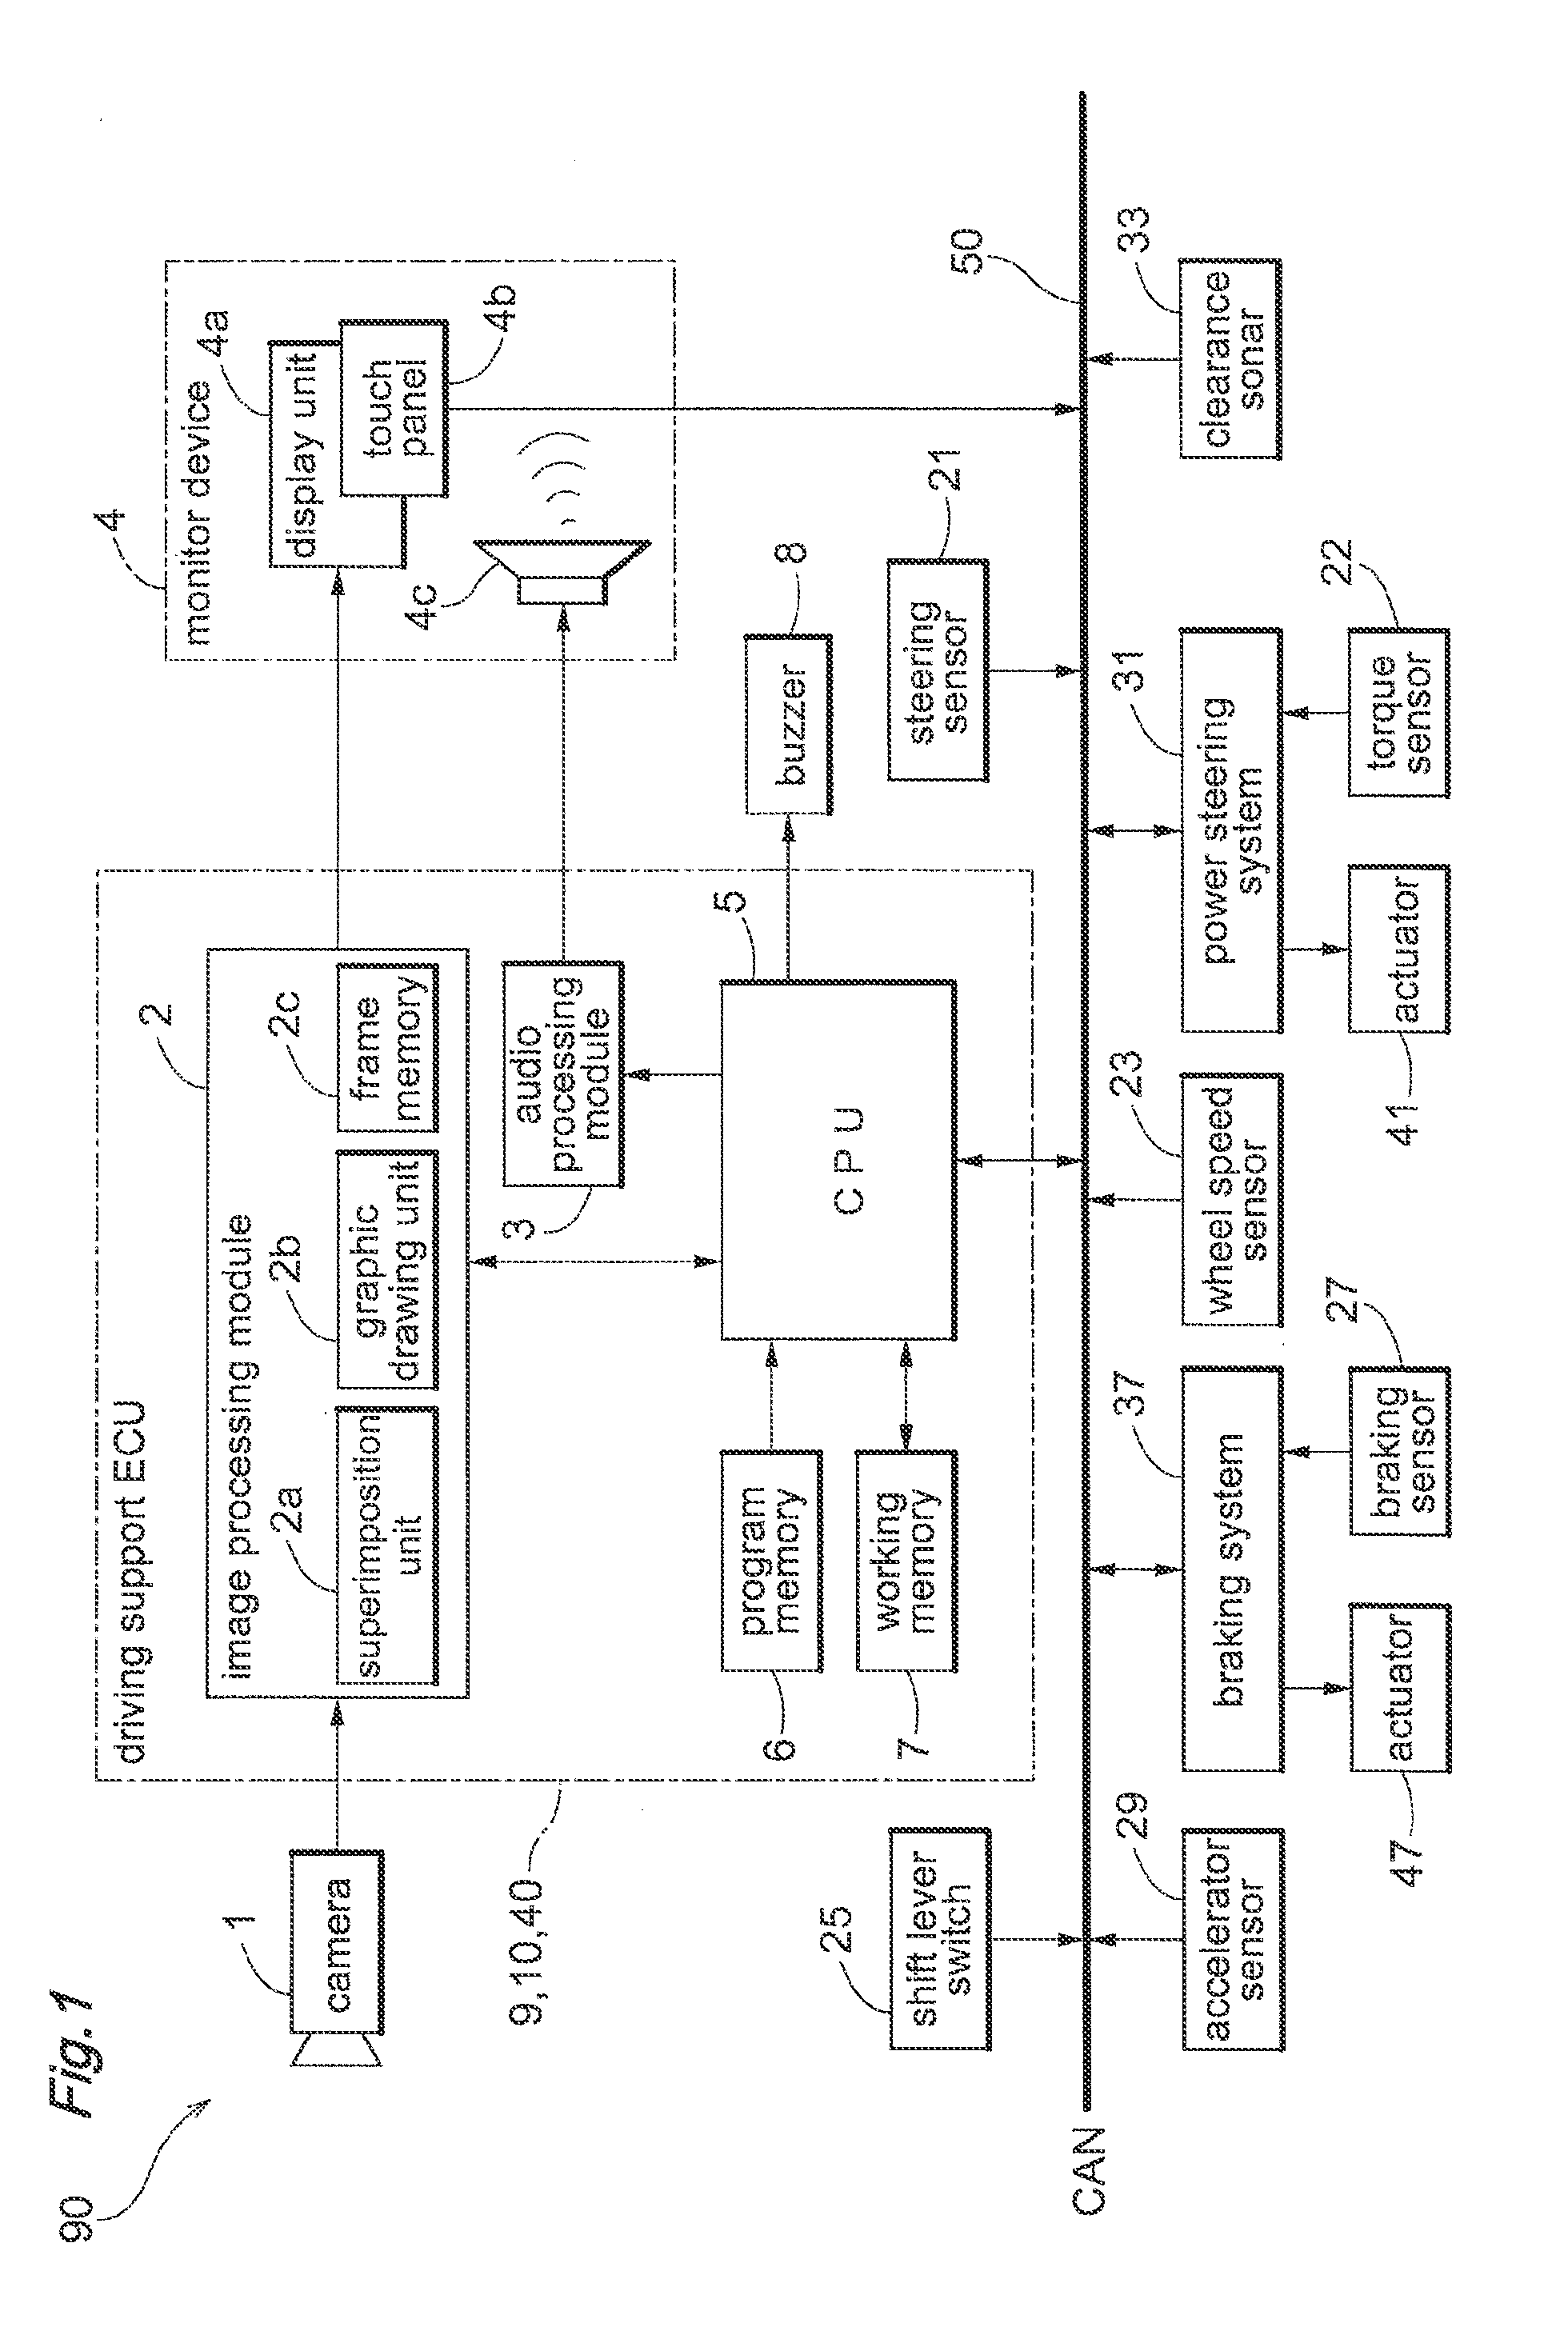 Vehicle surroundings awareness support device